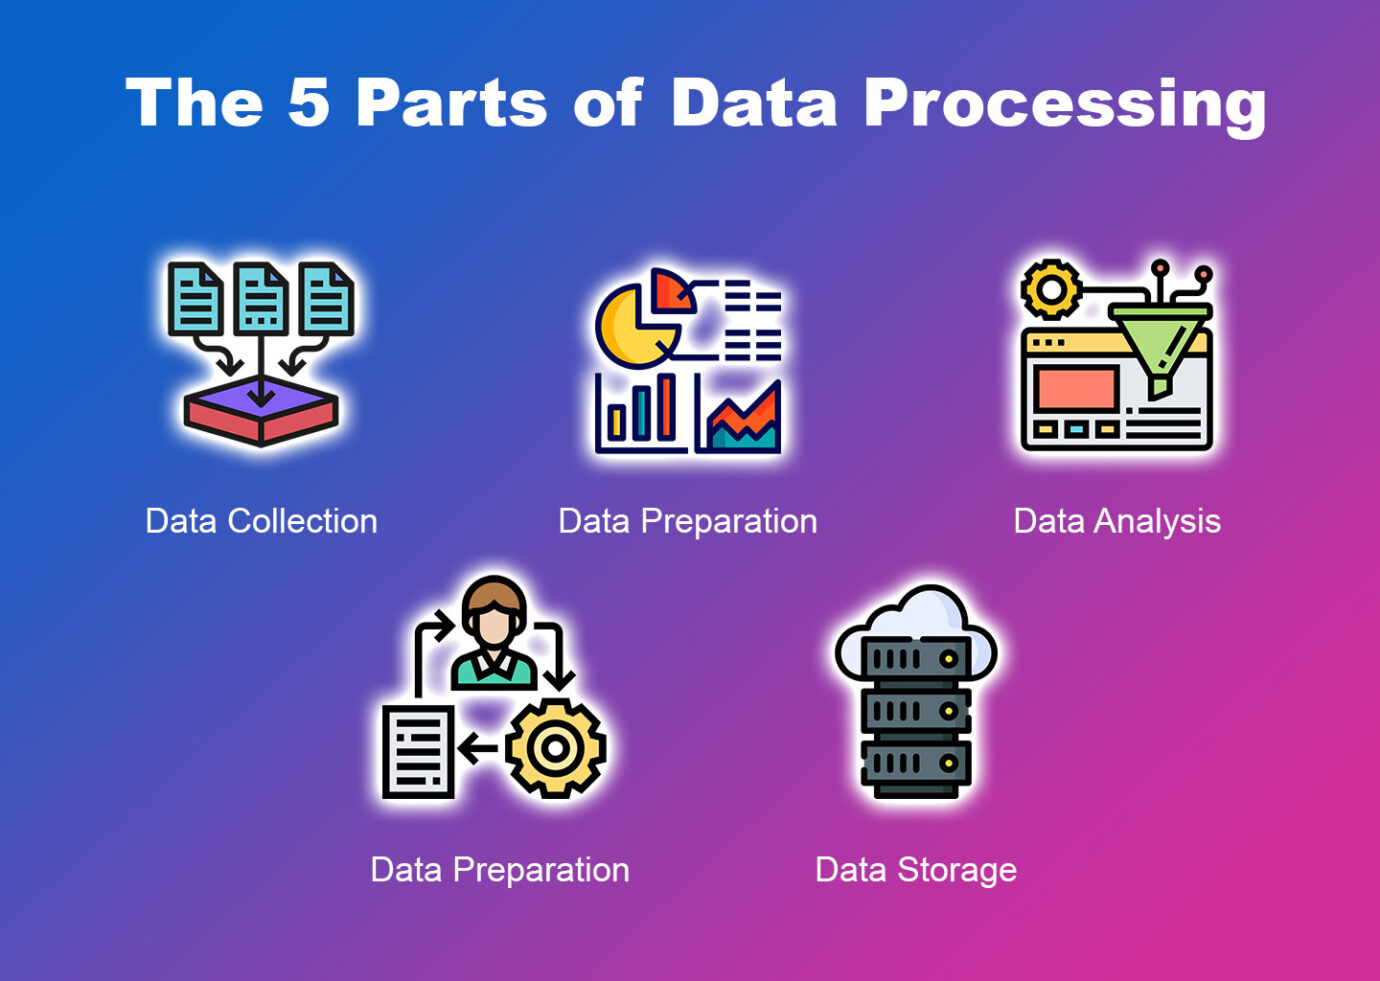 The 5 Parts of Data Processing